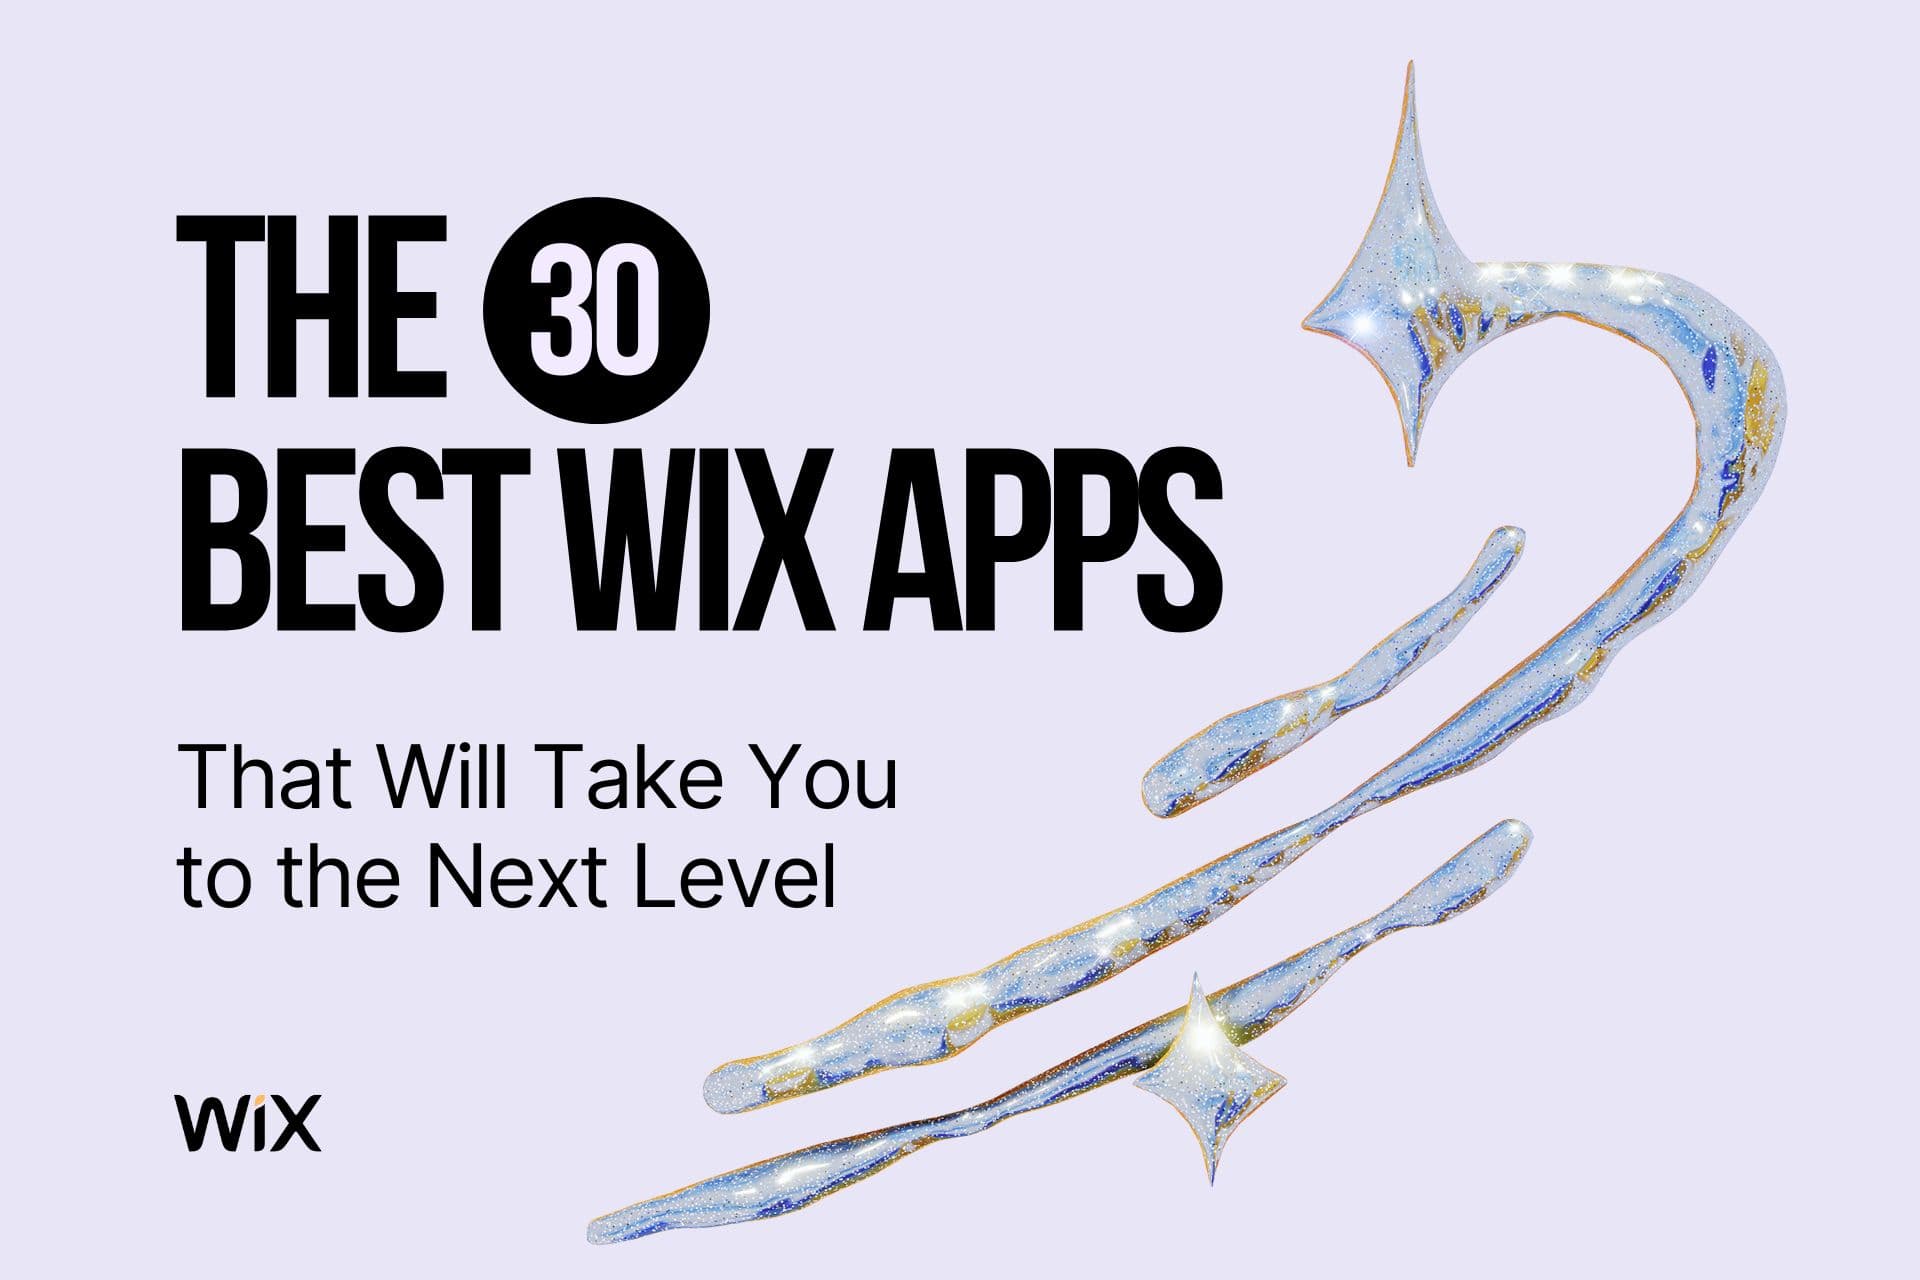 The 30 Best Wix Apps That Will Take You to the Next Level